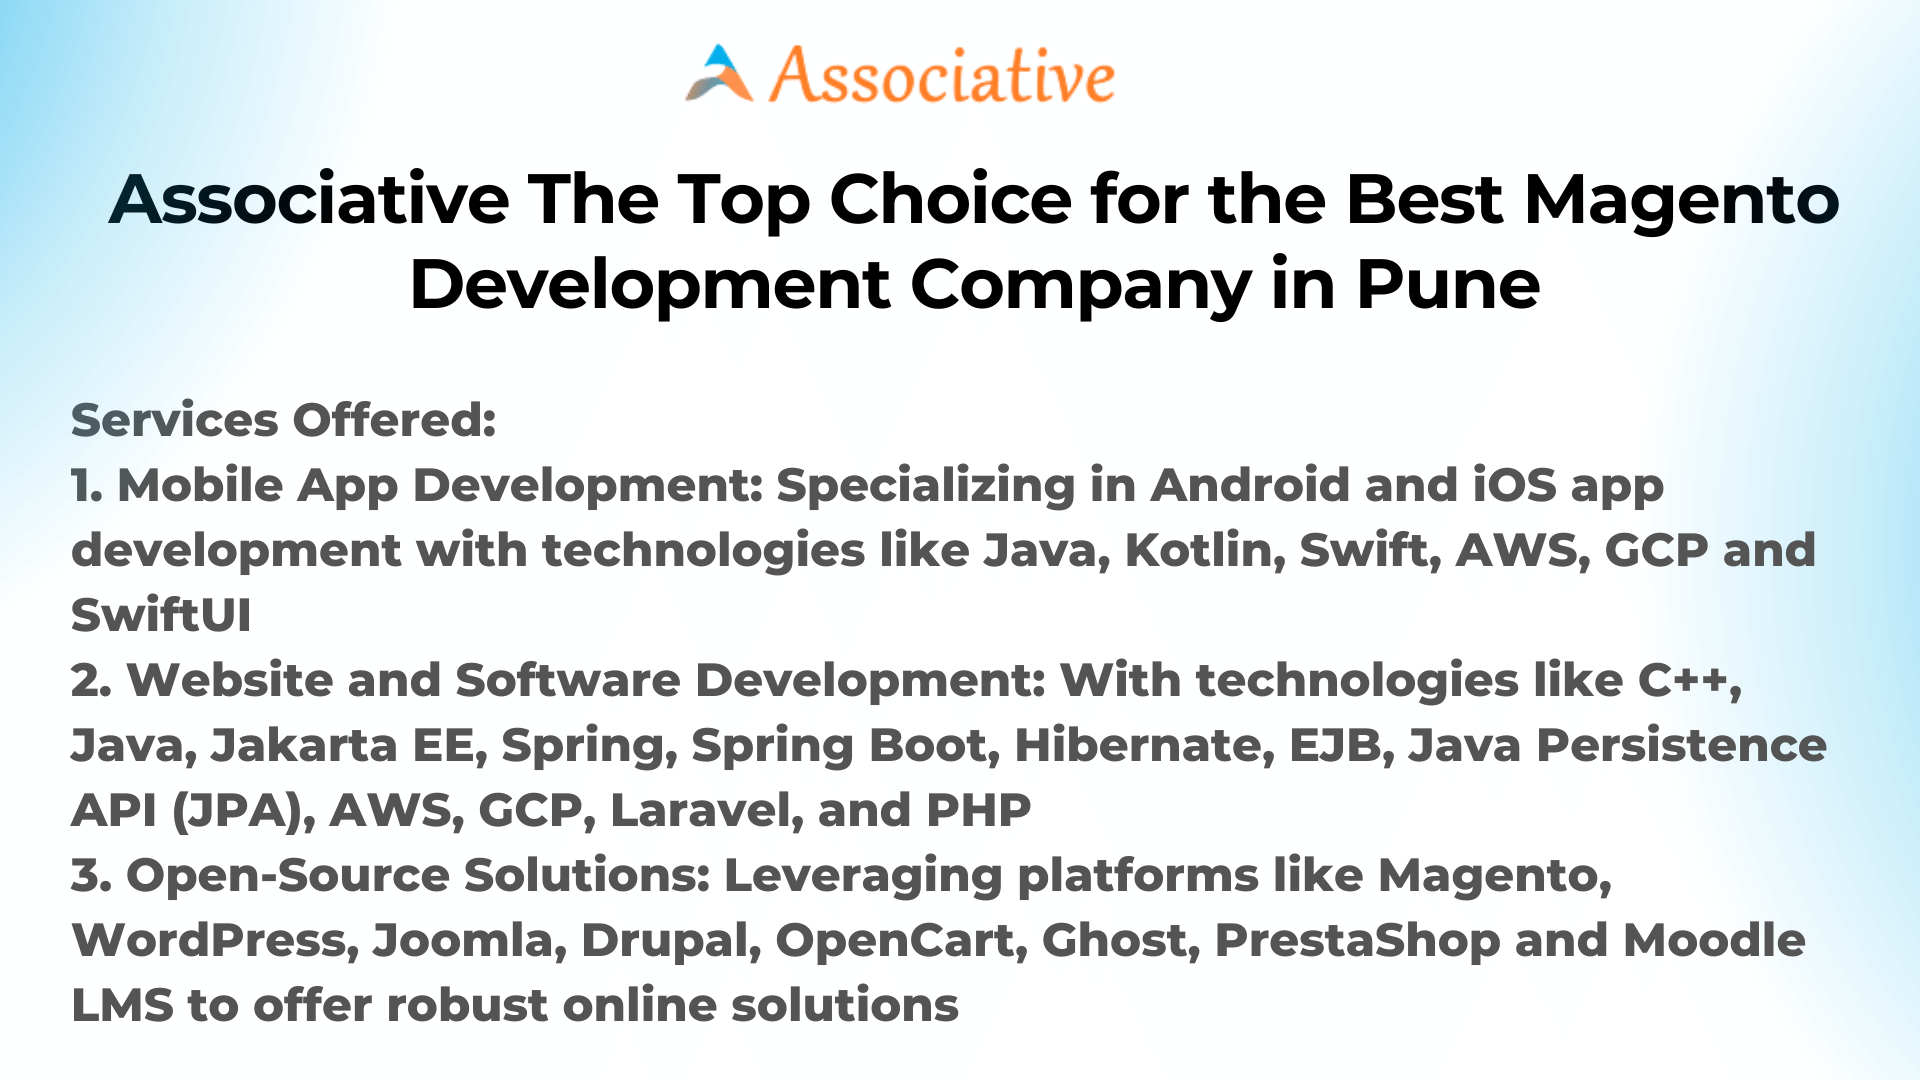 Associative The Top Choice for the Best Magento Development Company in Pune